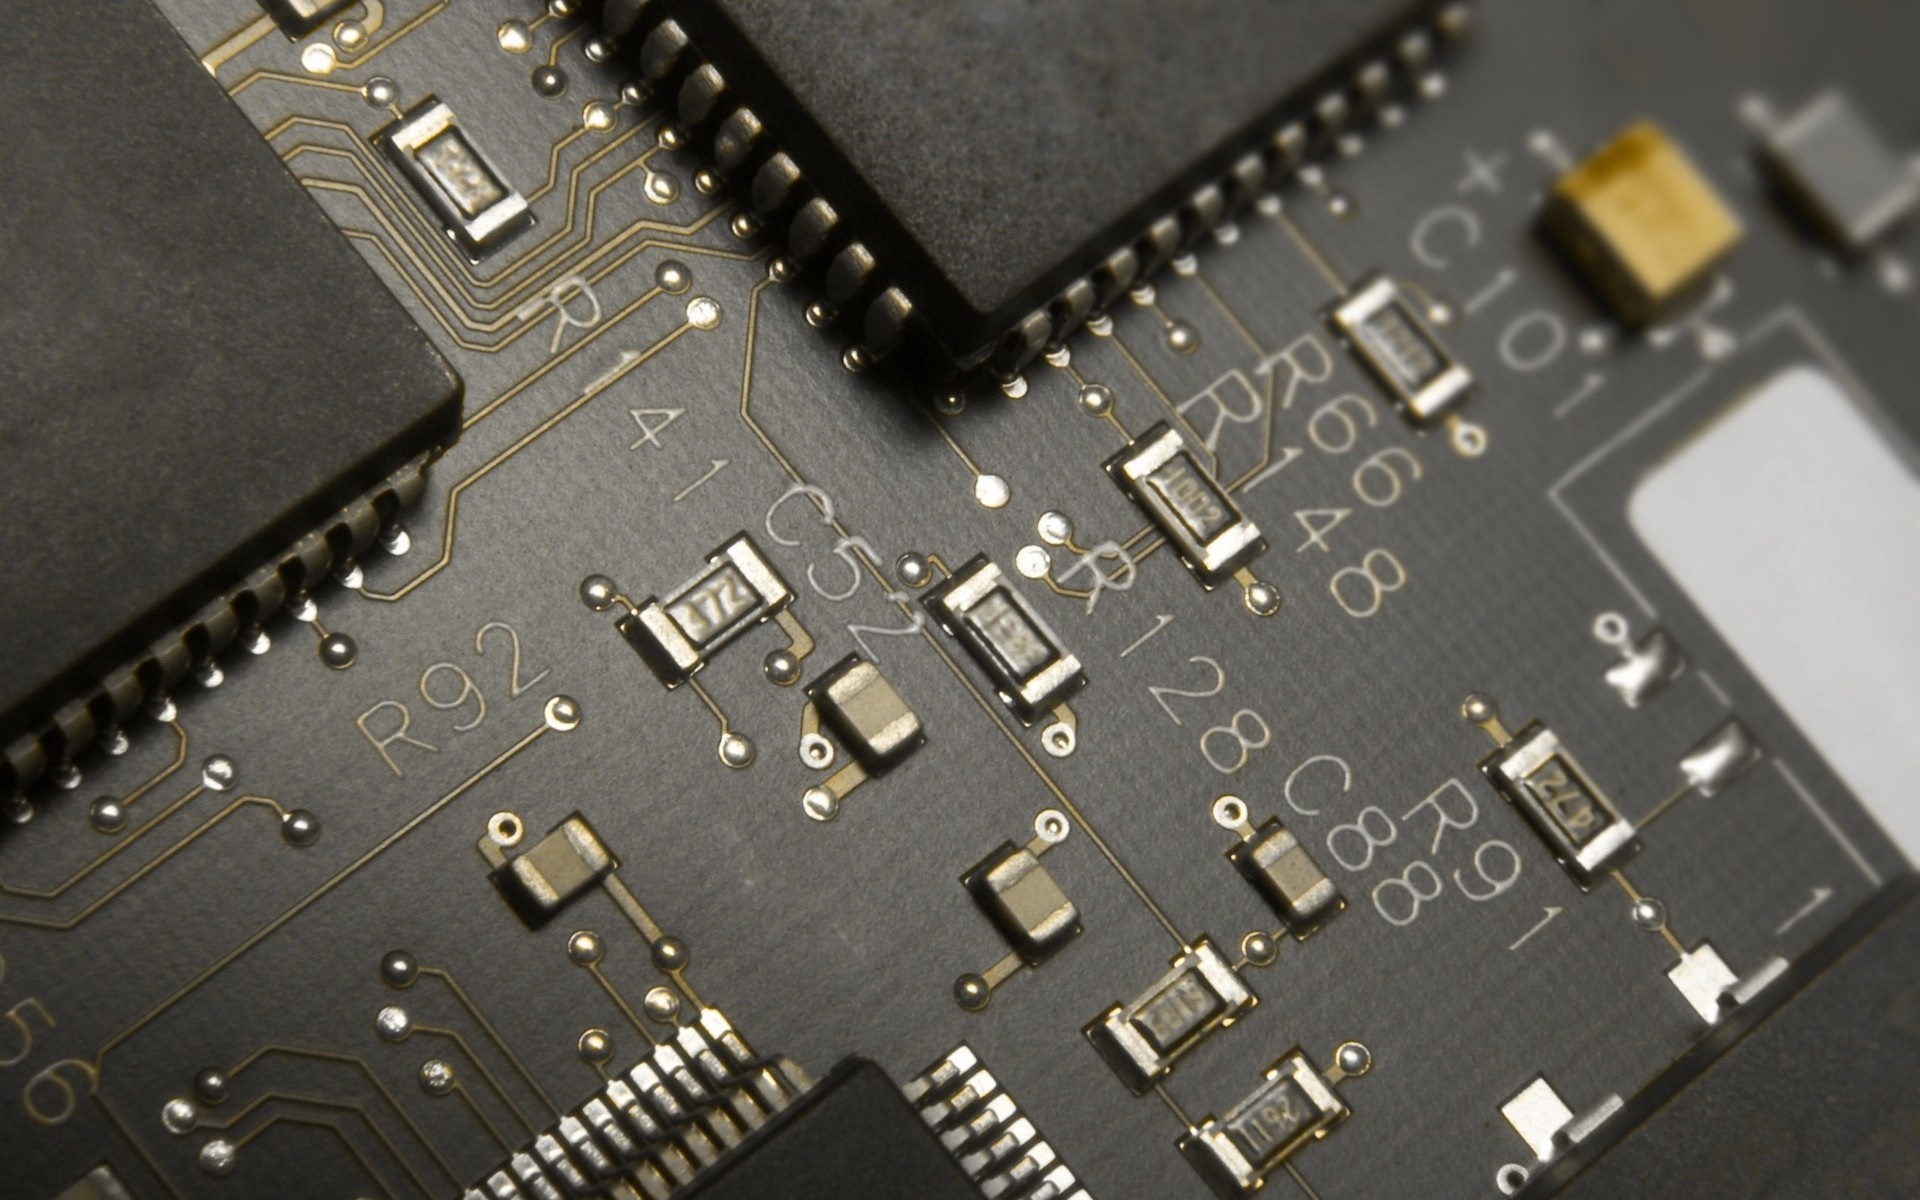 microcontroller HD wallpapers, Backgrounds